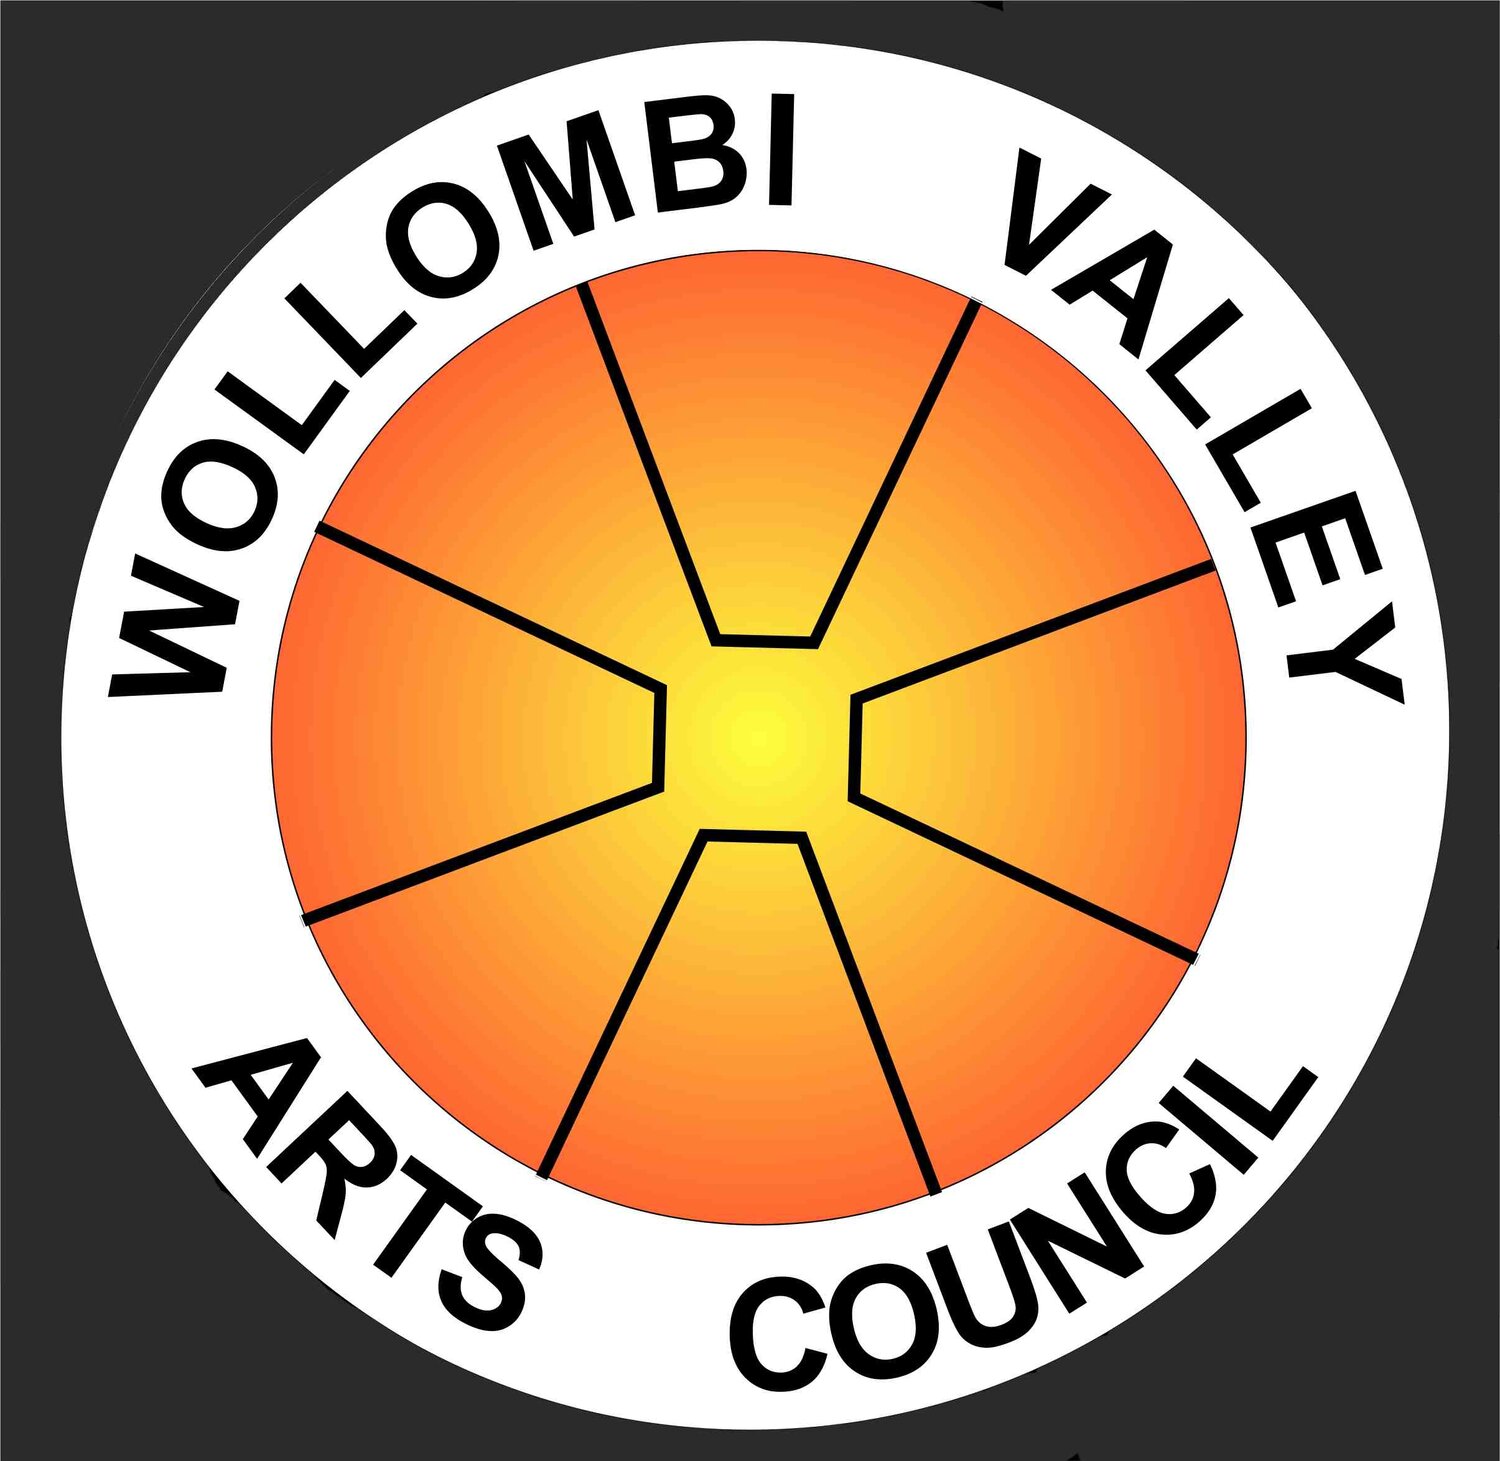 Wollombi Valley Arts Council